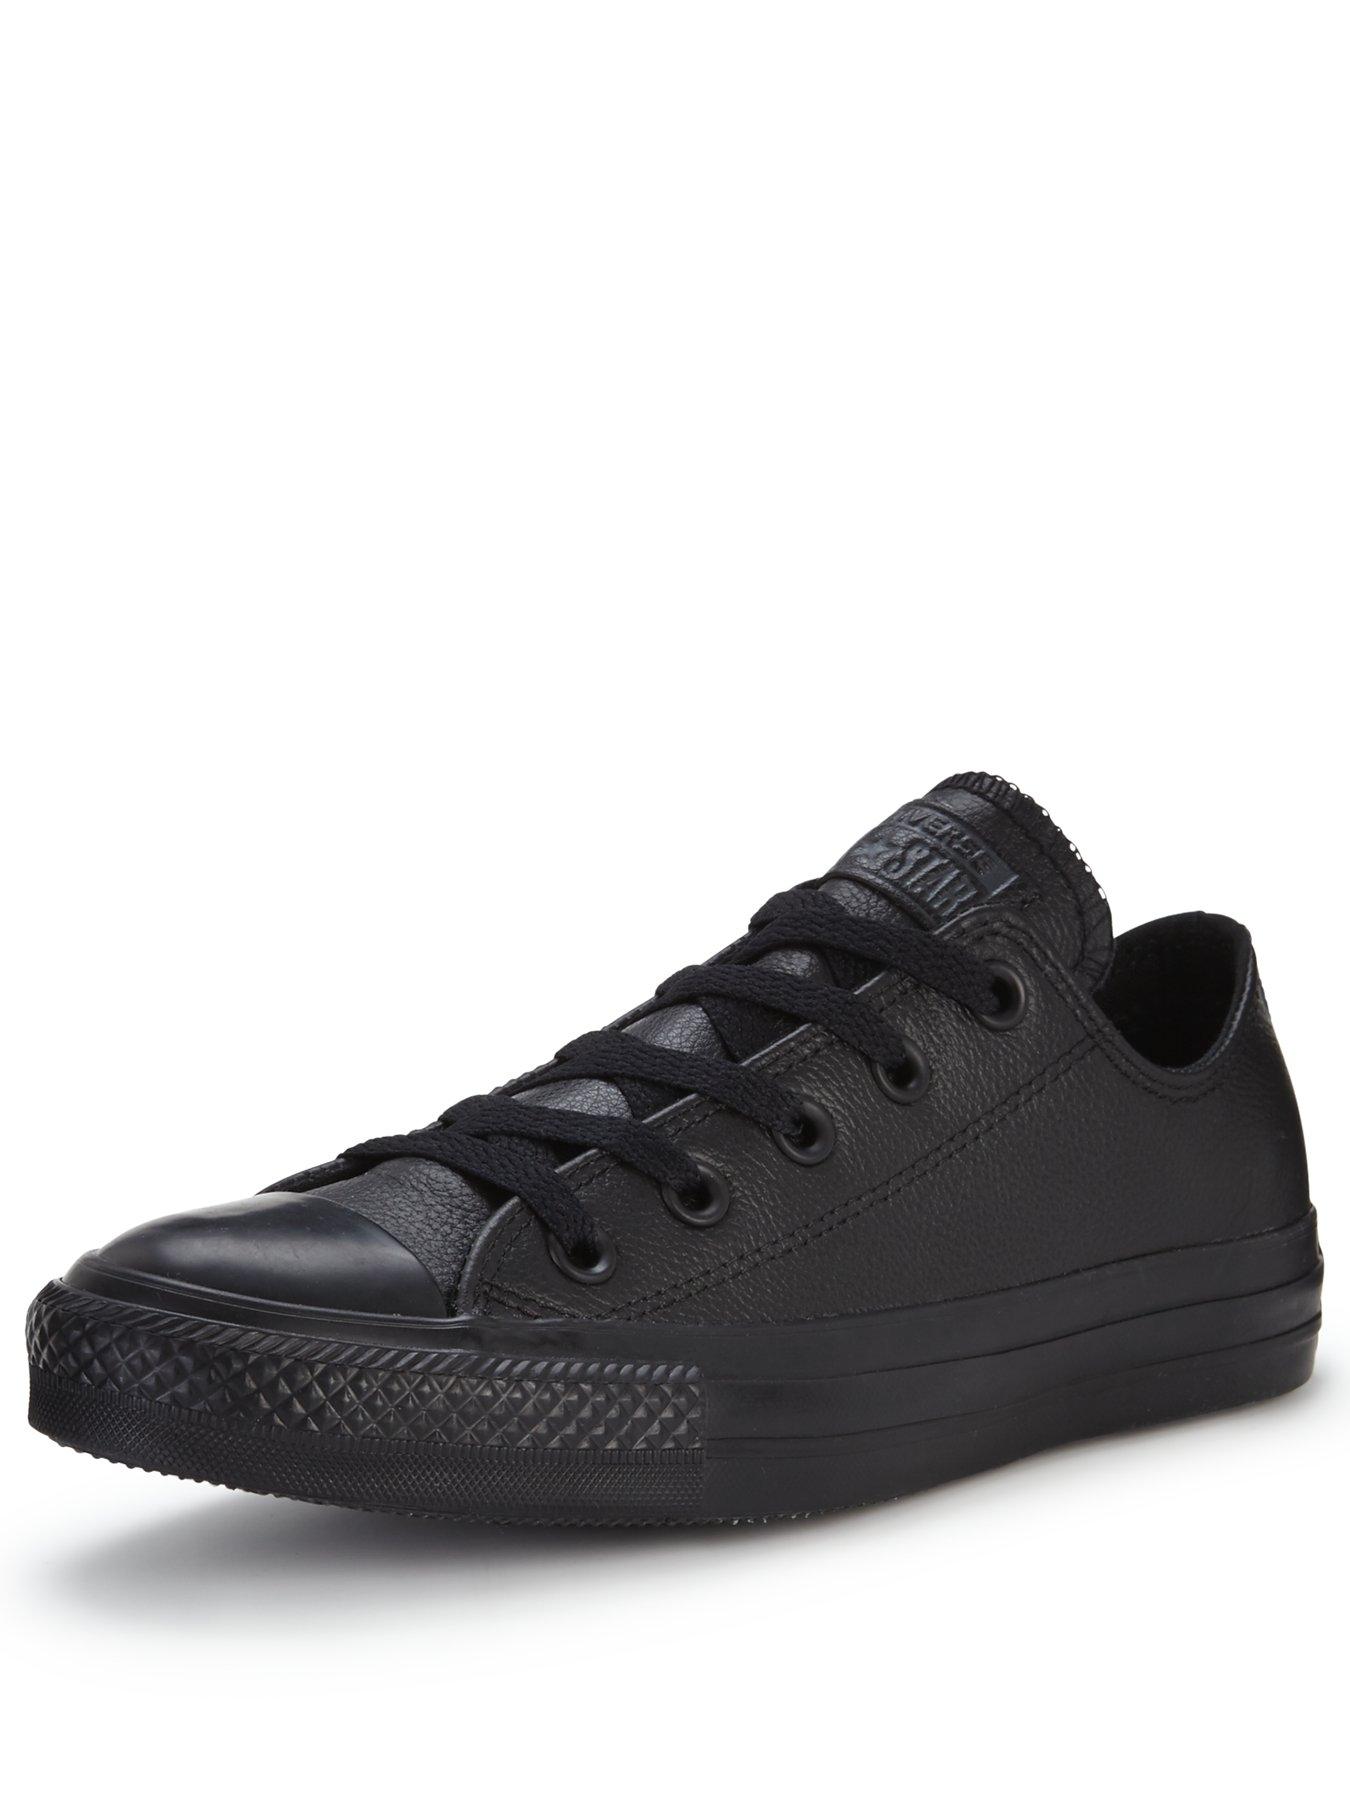 black converse trainers womens